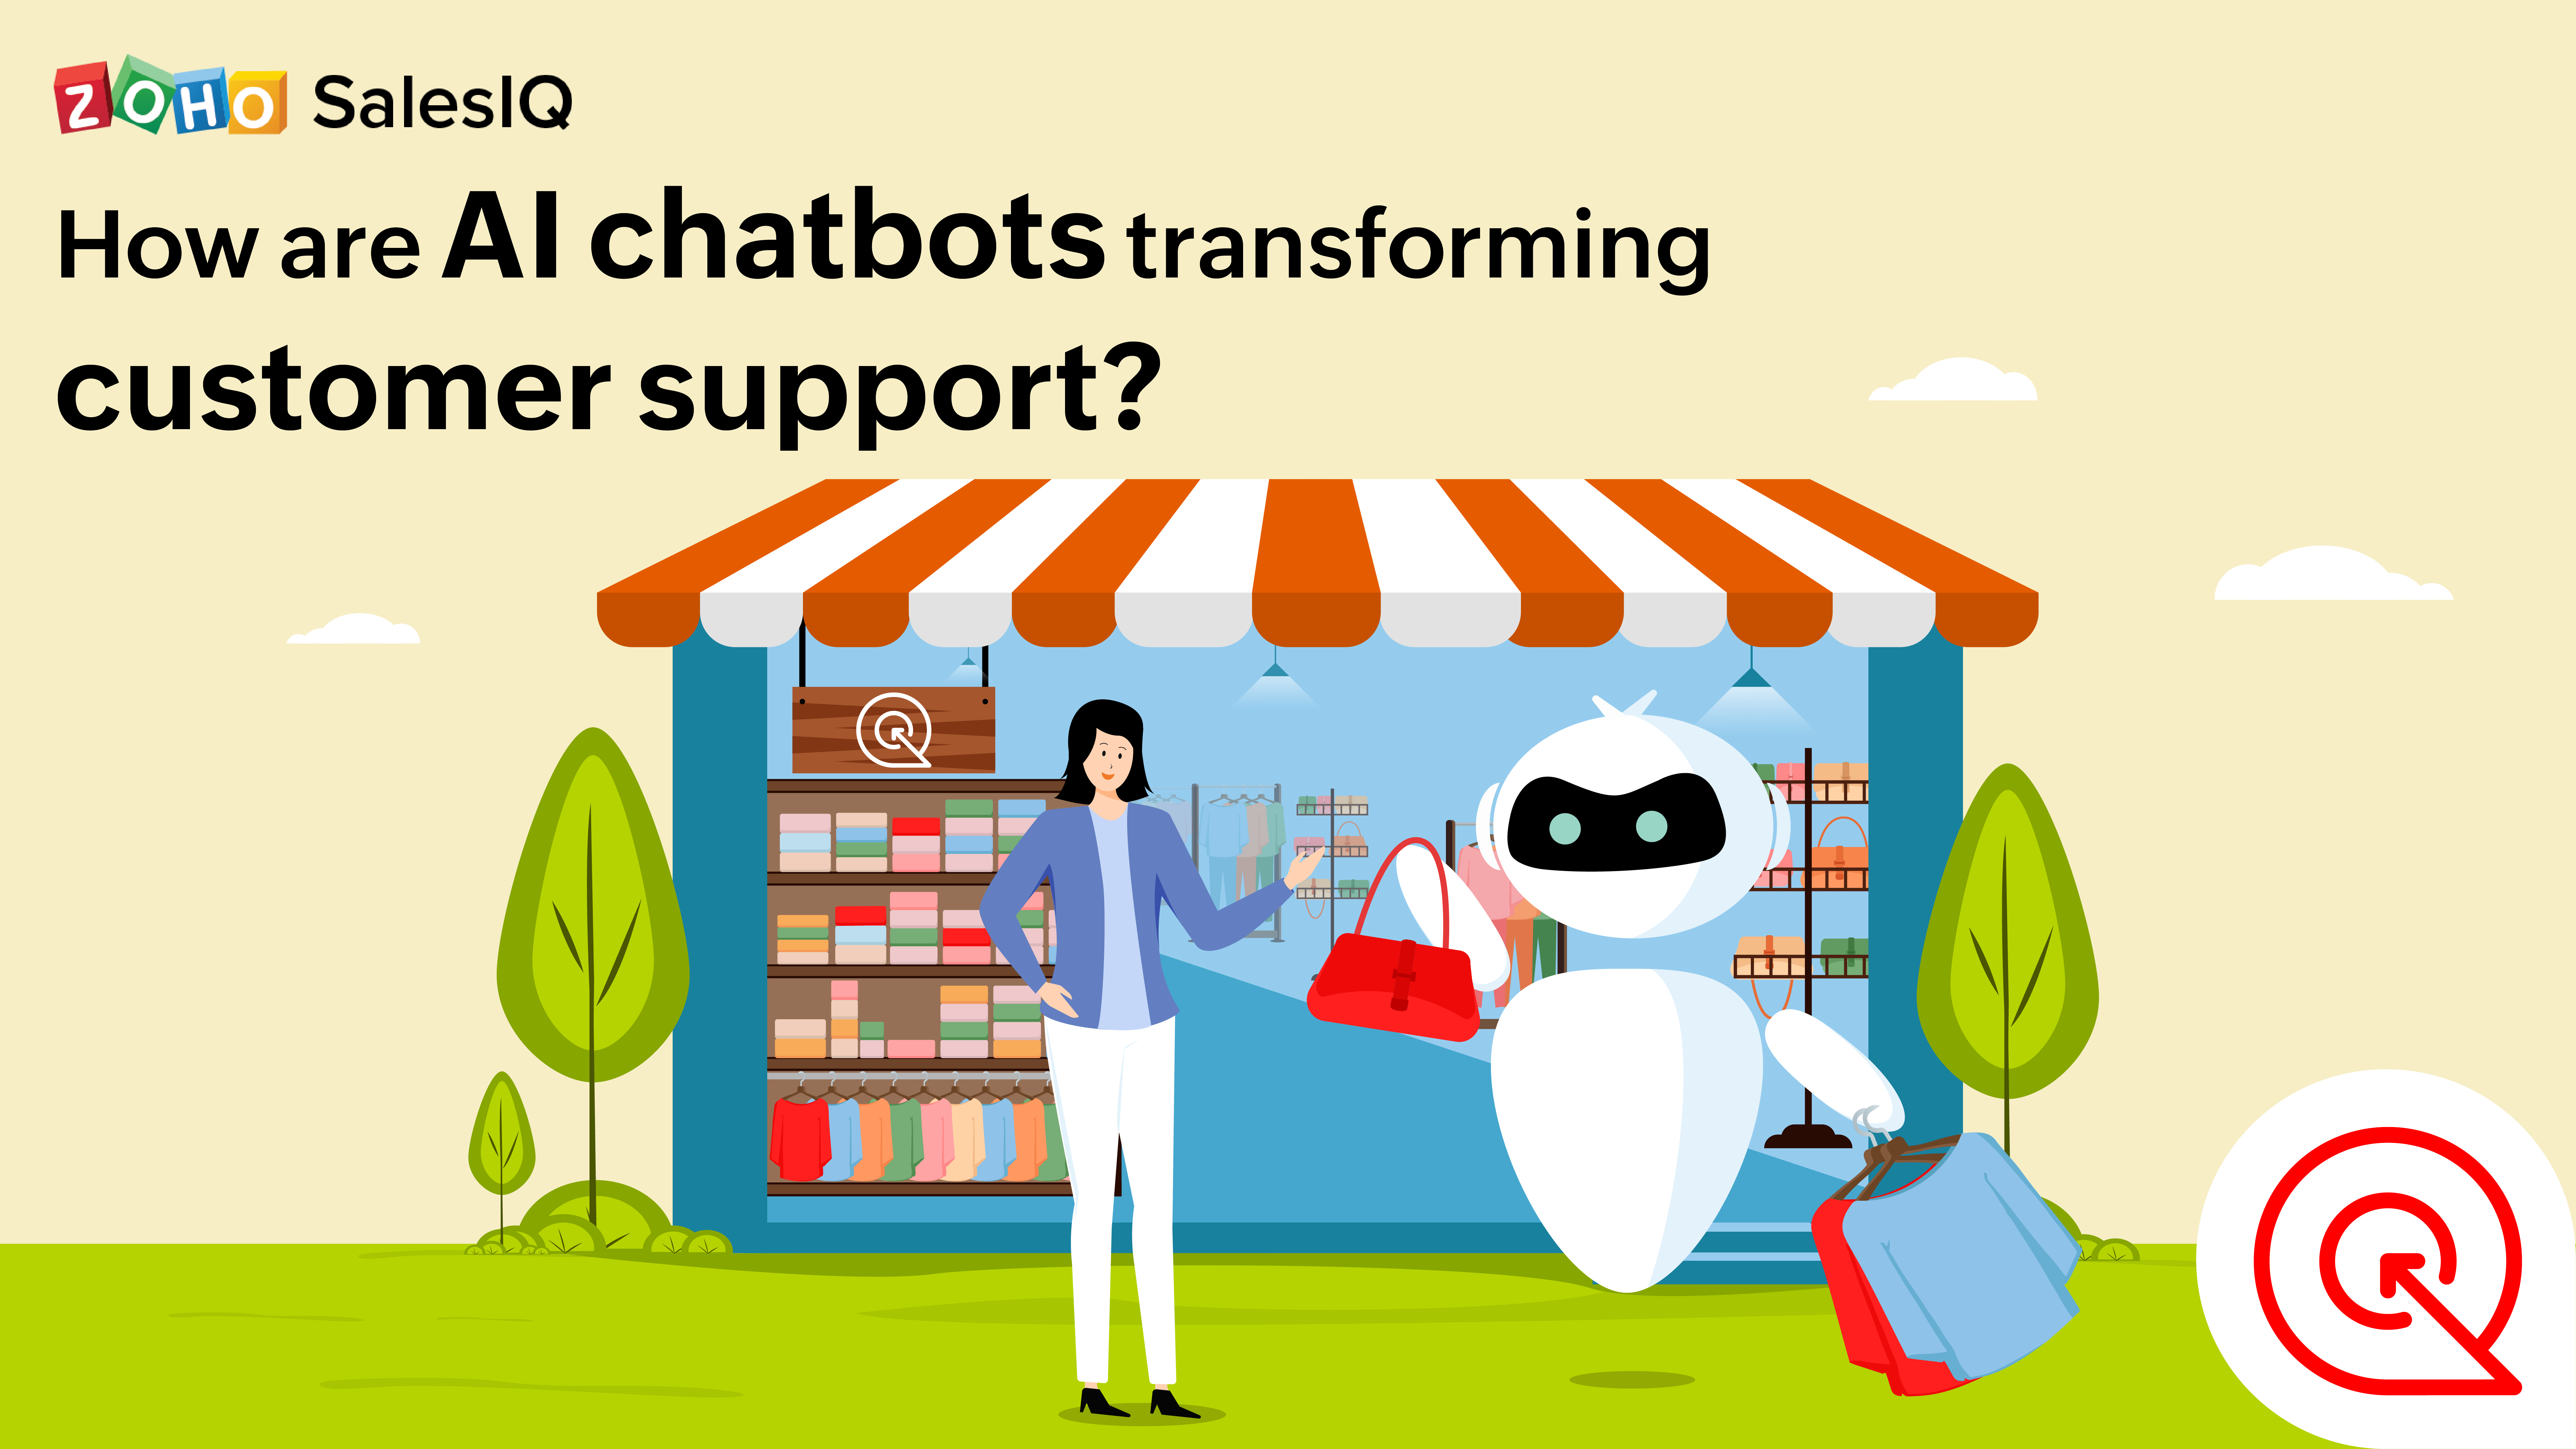 How are AI chatbots transforming customer support?